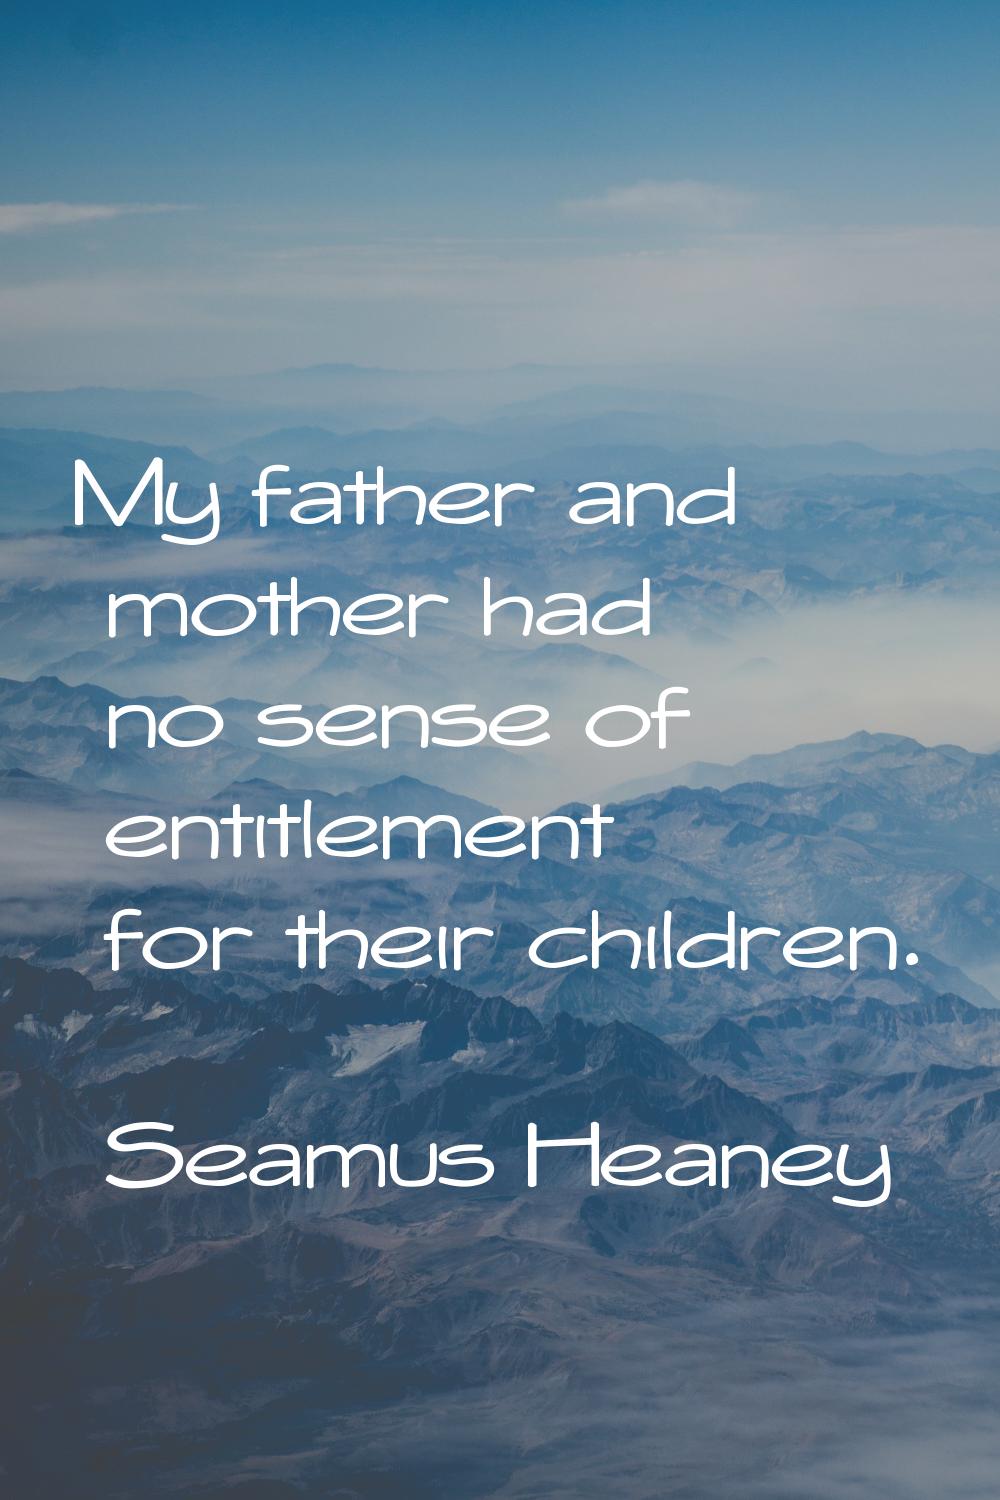 My father and mother had no sense of entitlement for their children.